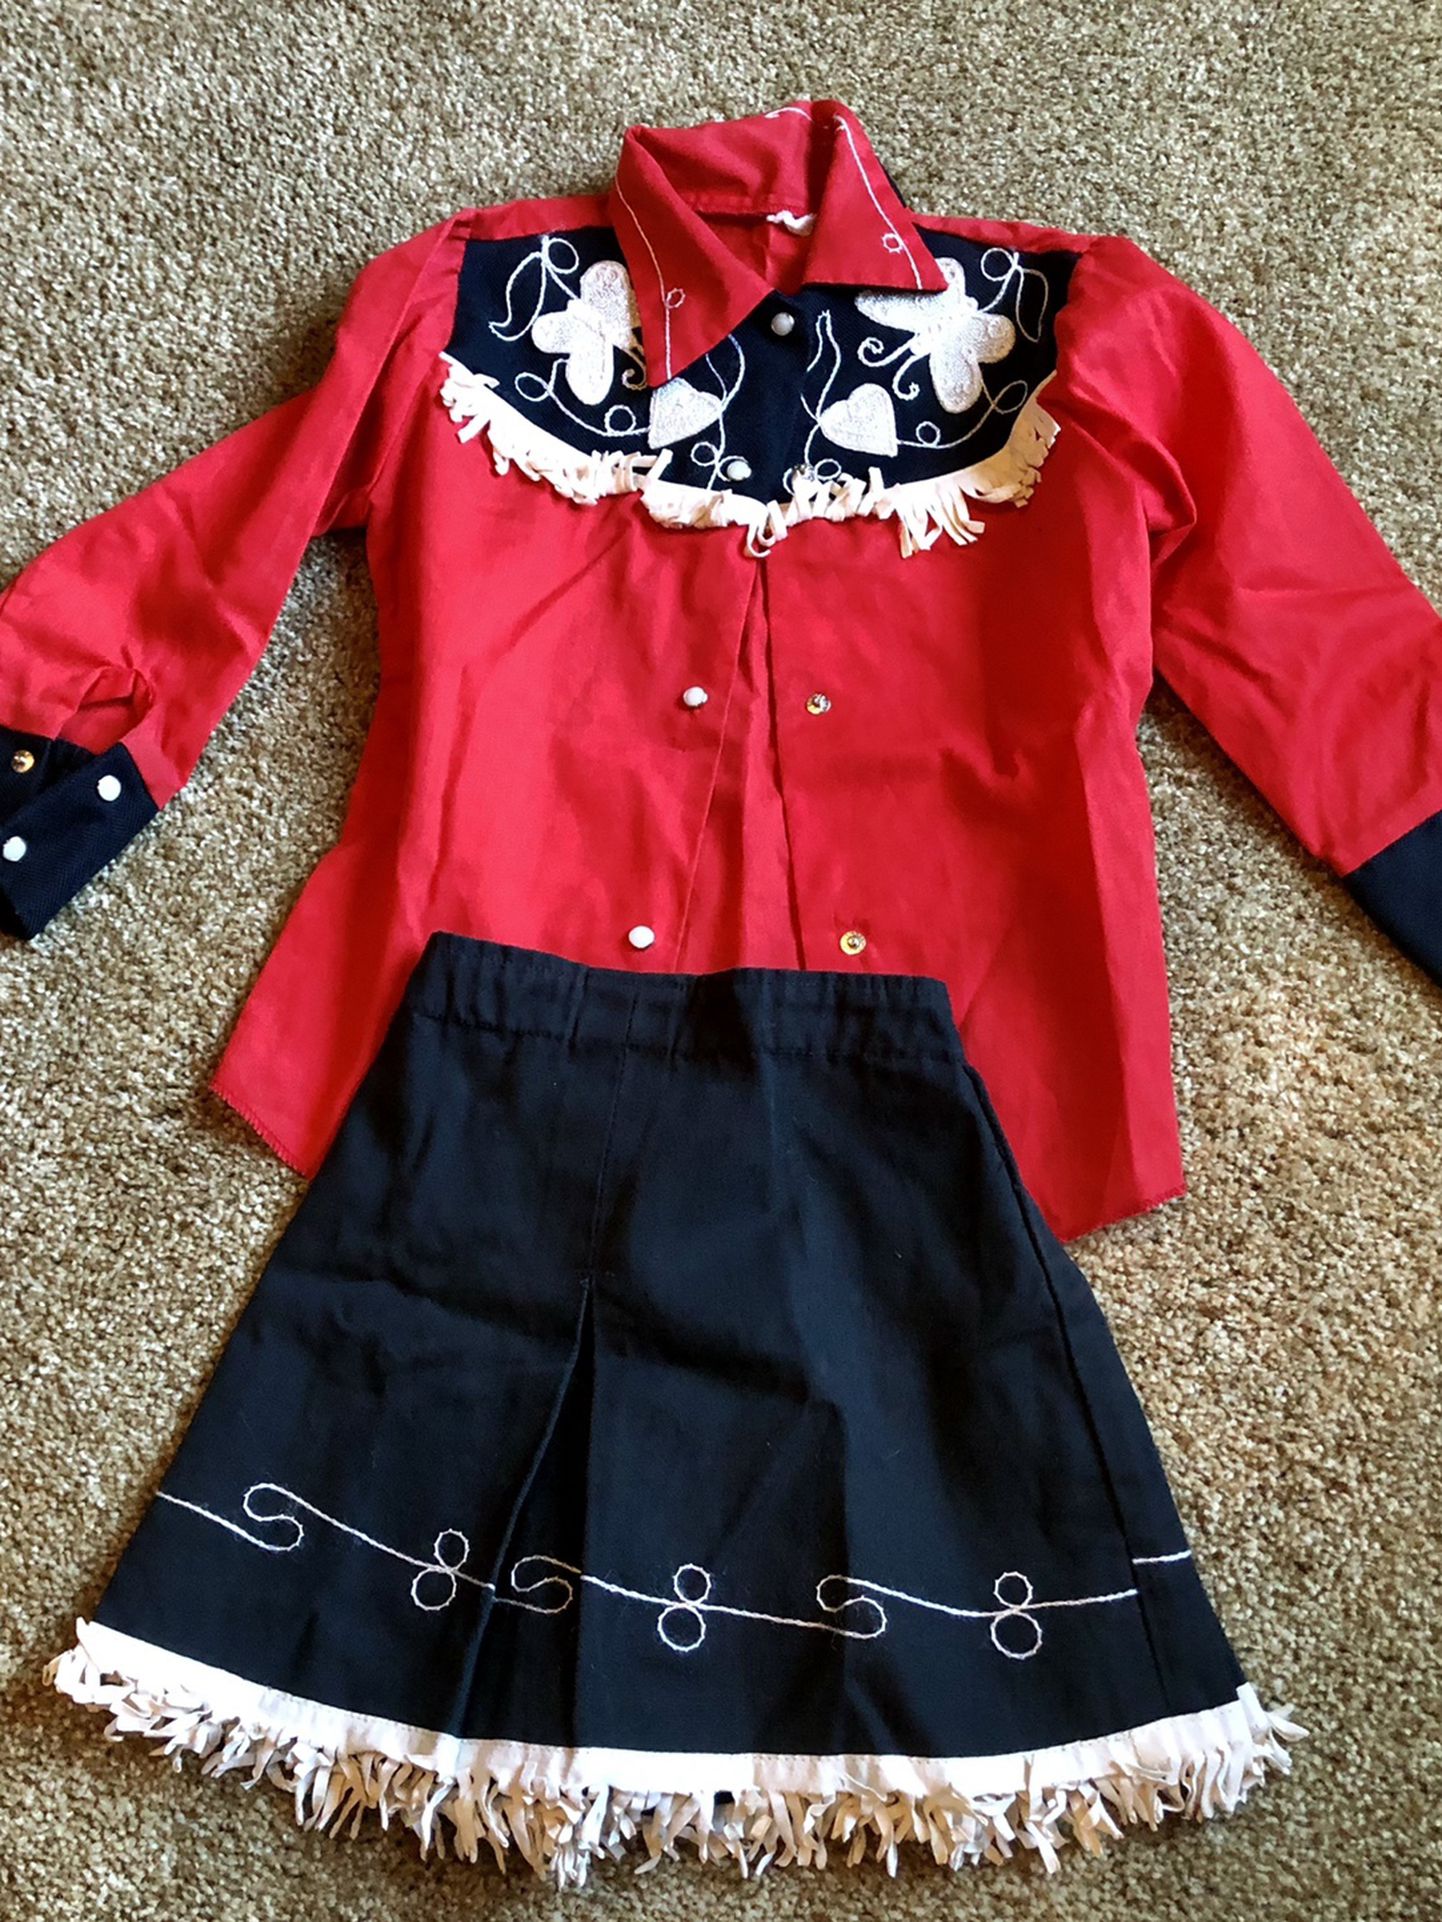 Girls Cowgirl Costume, Child’s Size 5